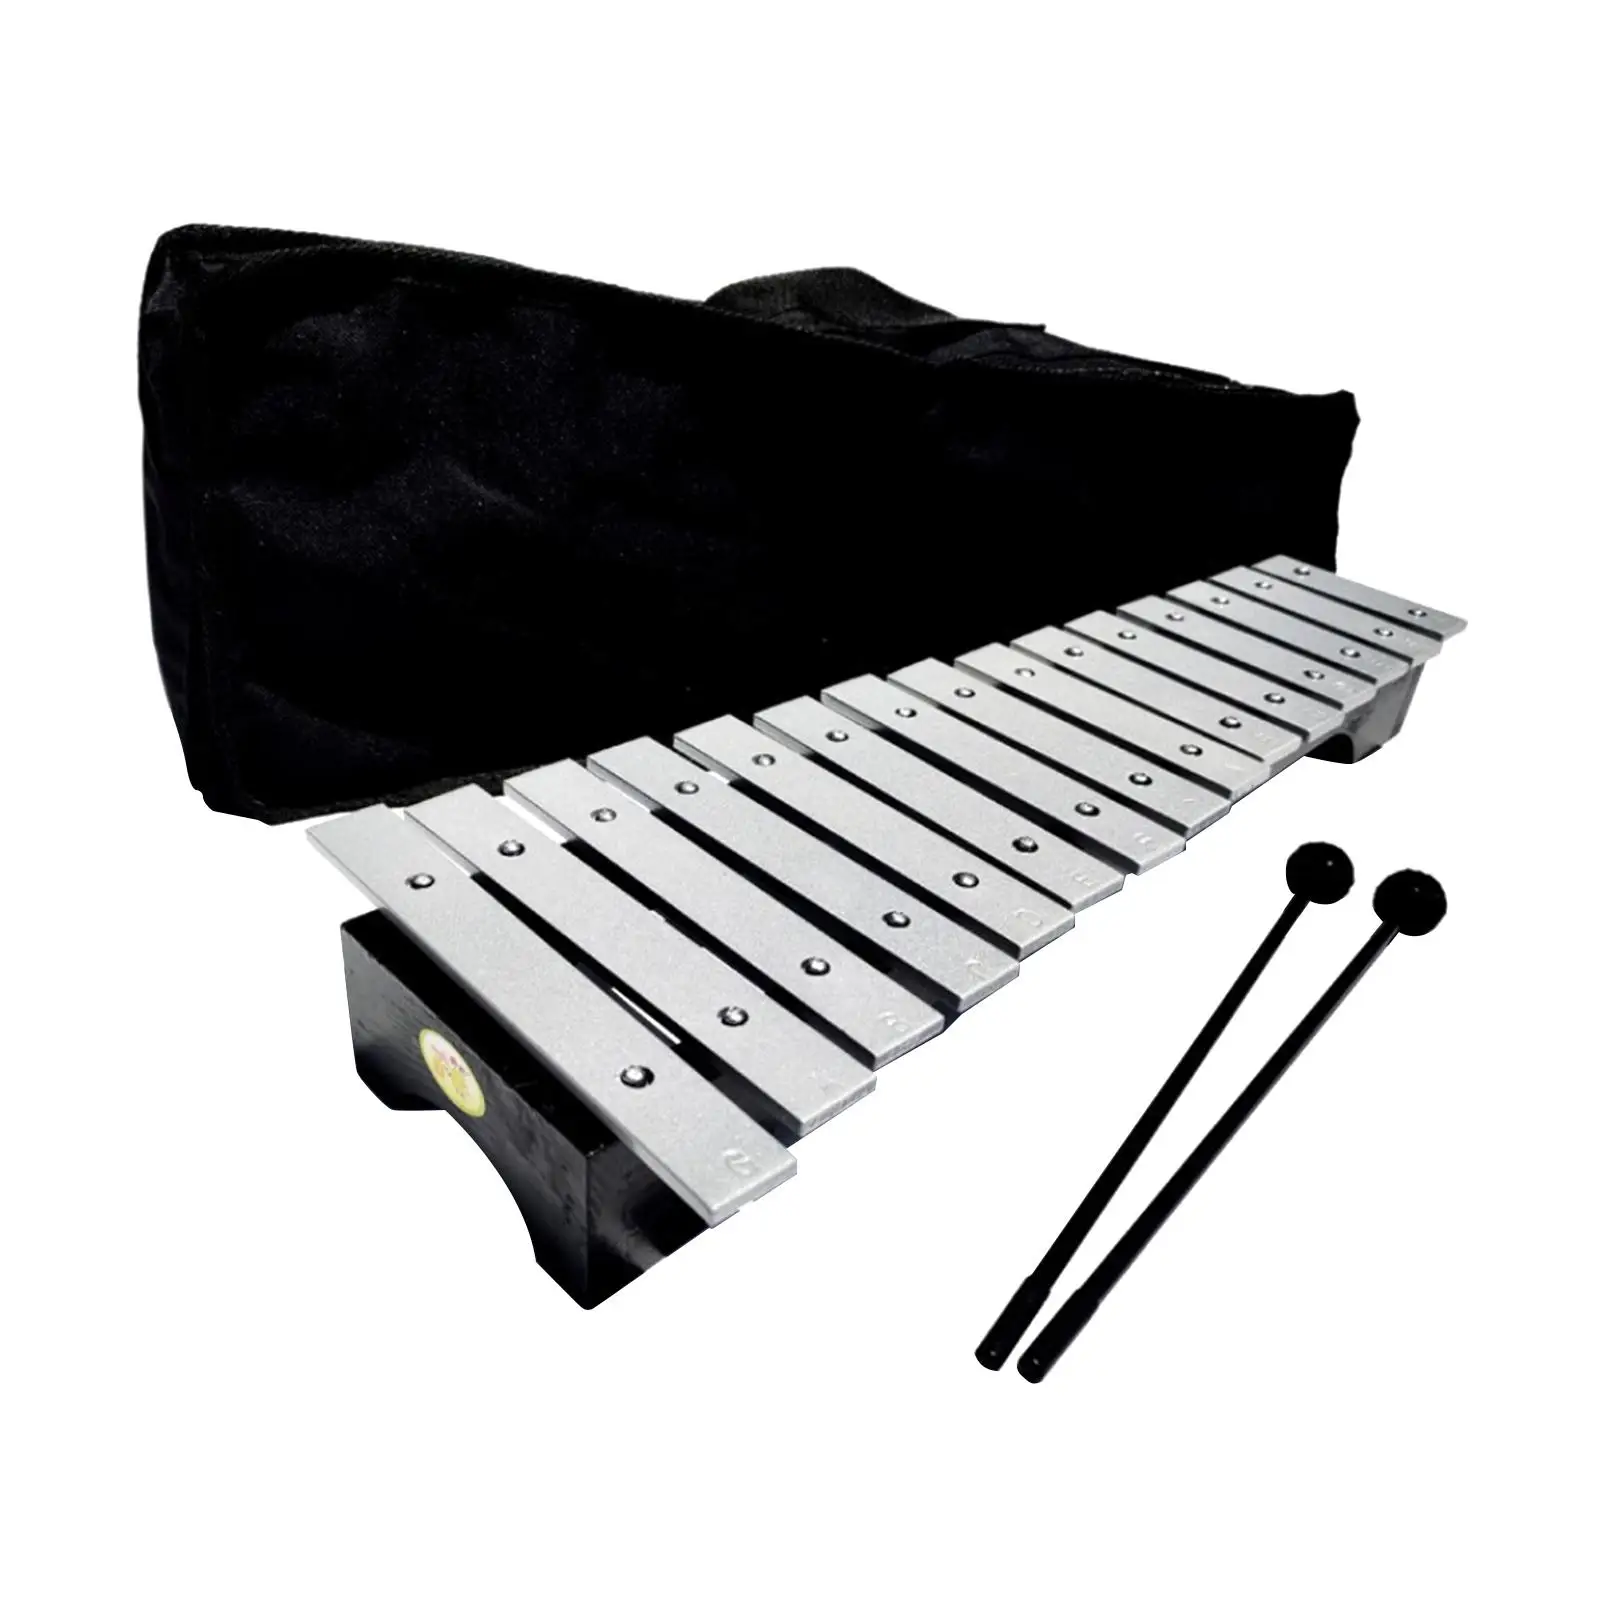 

15 Note Metal Xylophone with Carry Case and Mallets Music Instrument Toy Glockenspiel Xylophone for Birthday Gift Kids Beginner